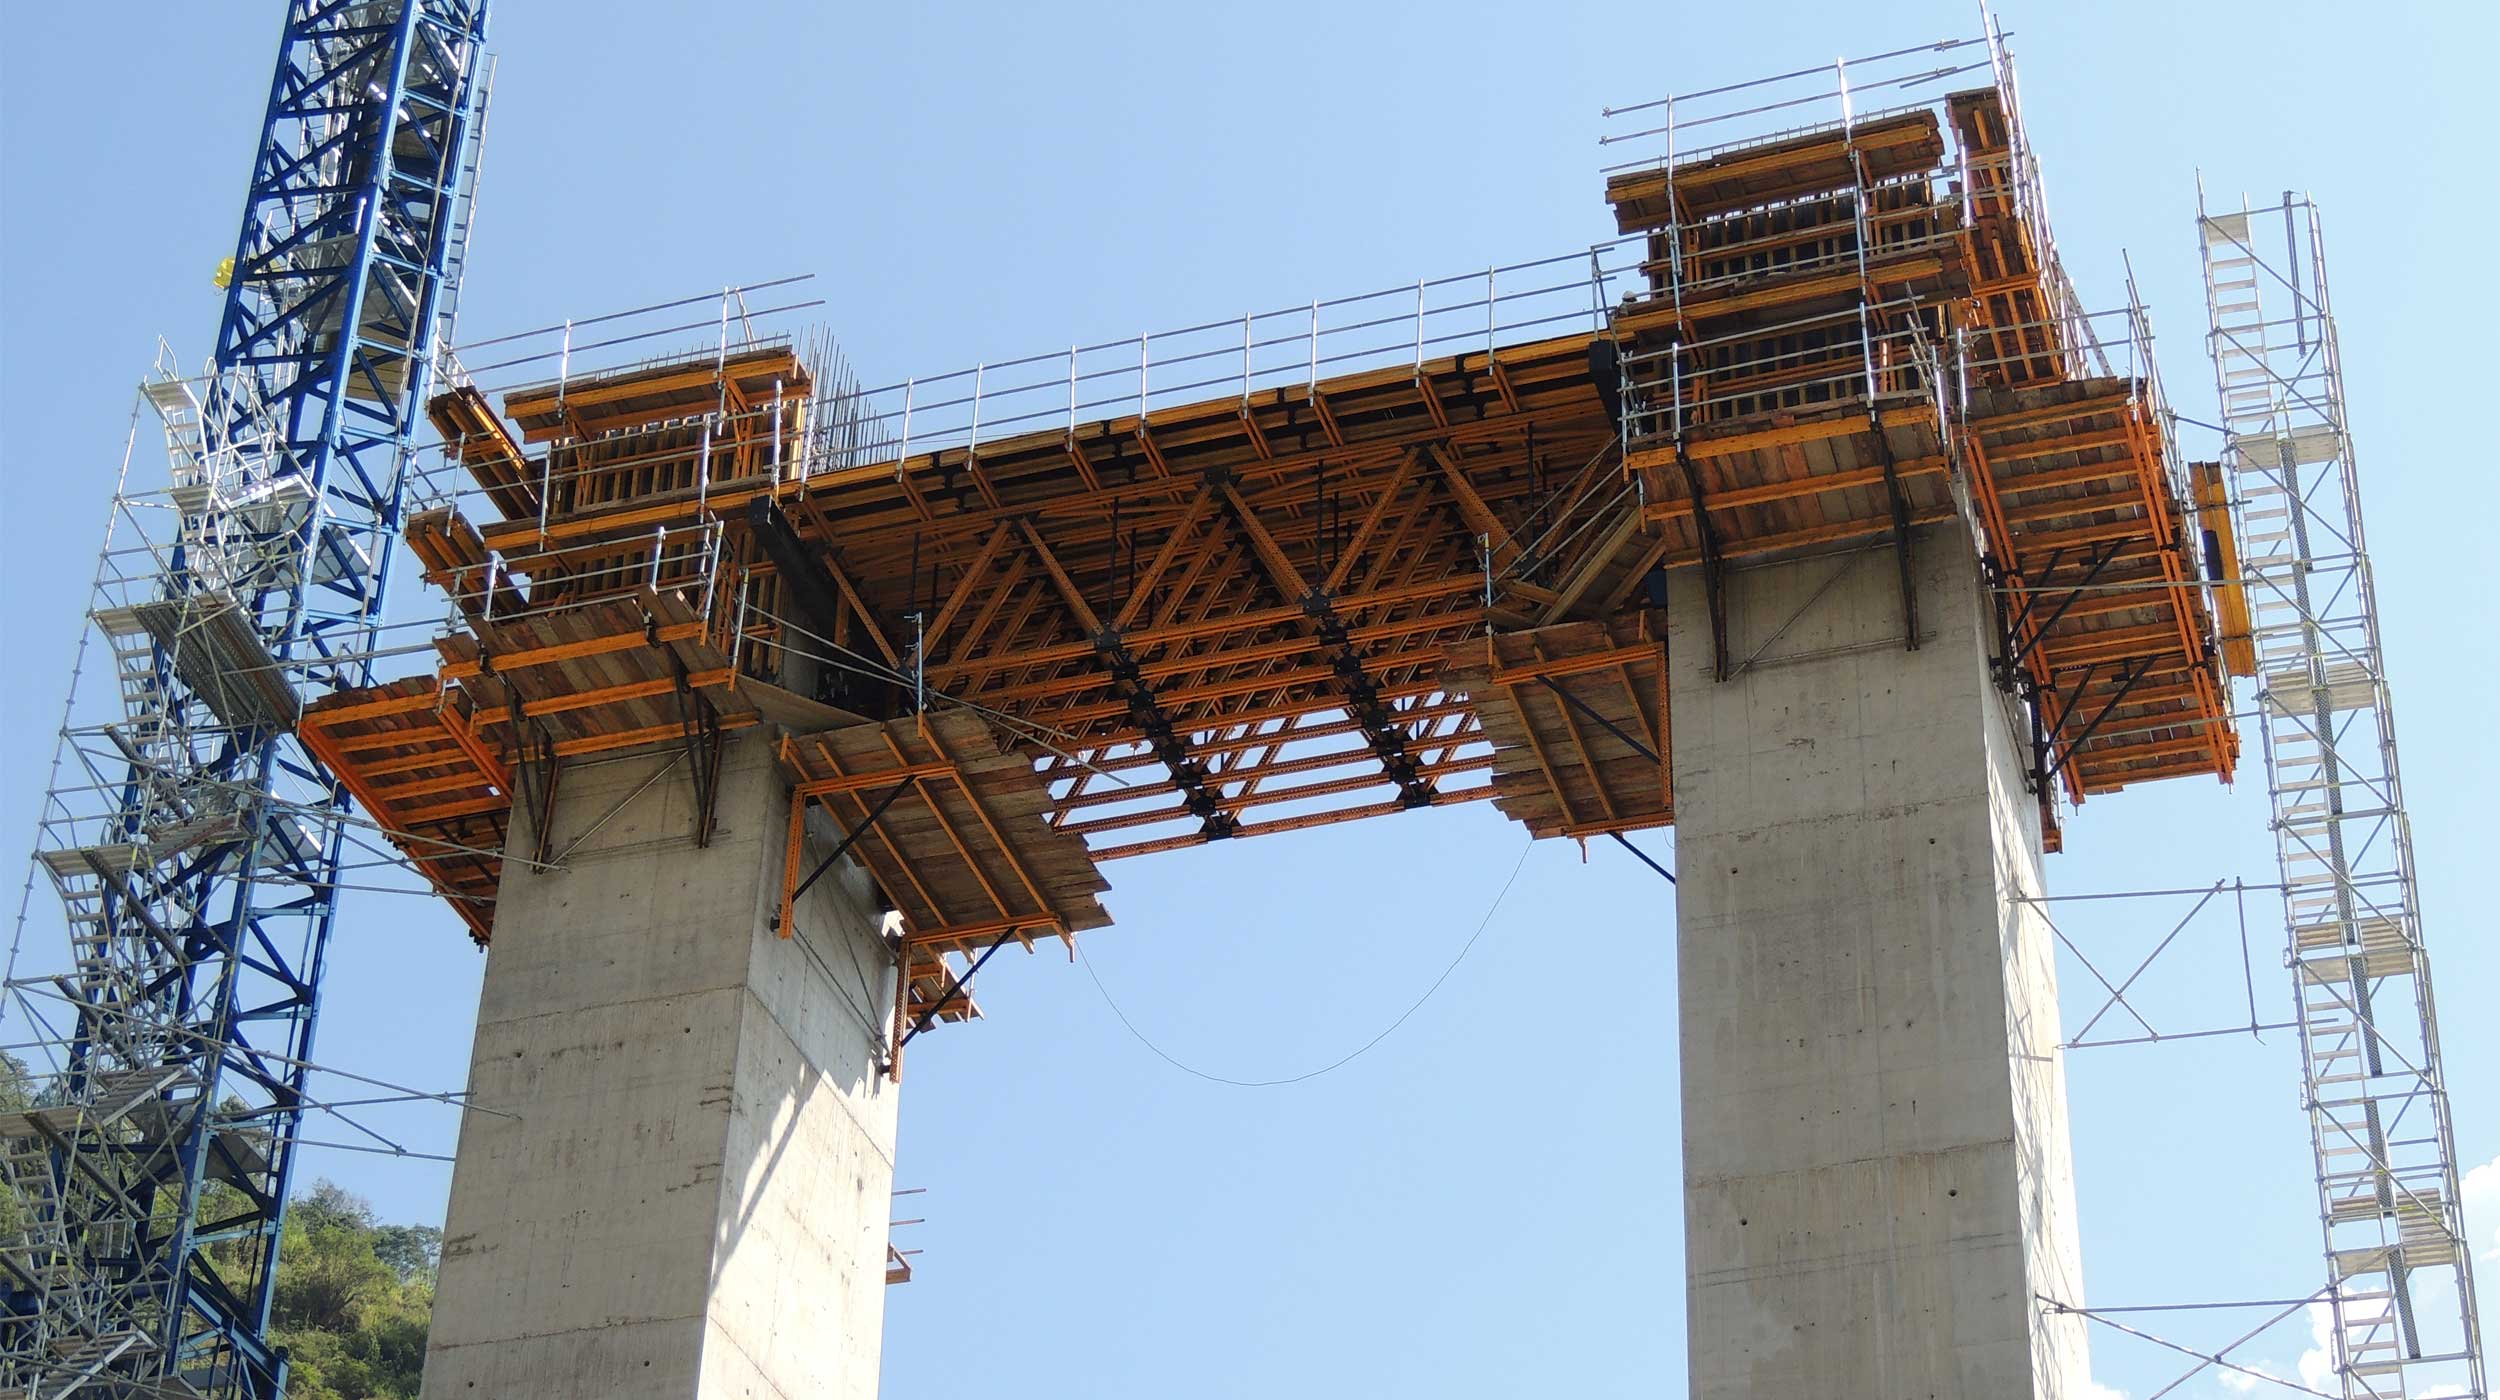 The Hisgaura Bridge, stretching 653 m in length with a single span reaching 400 m, will become in 2018 the longest cable-stayed bridge in South America.